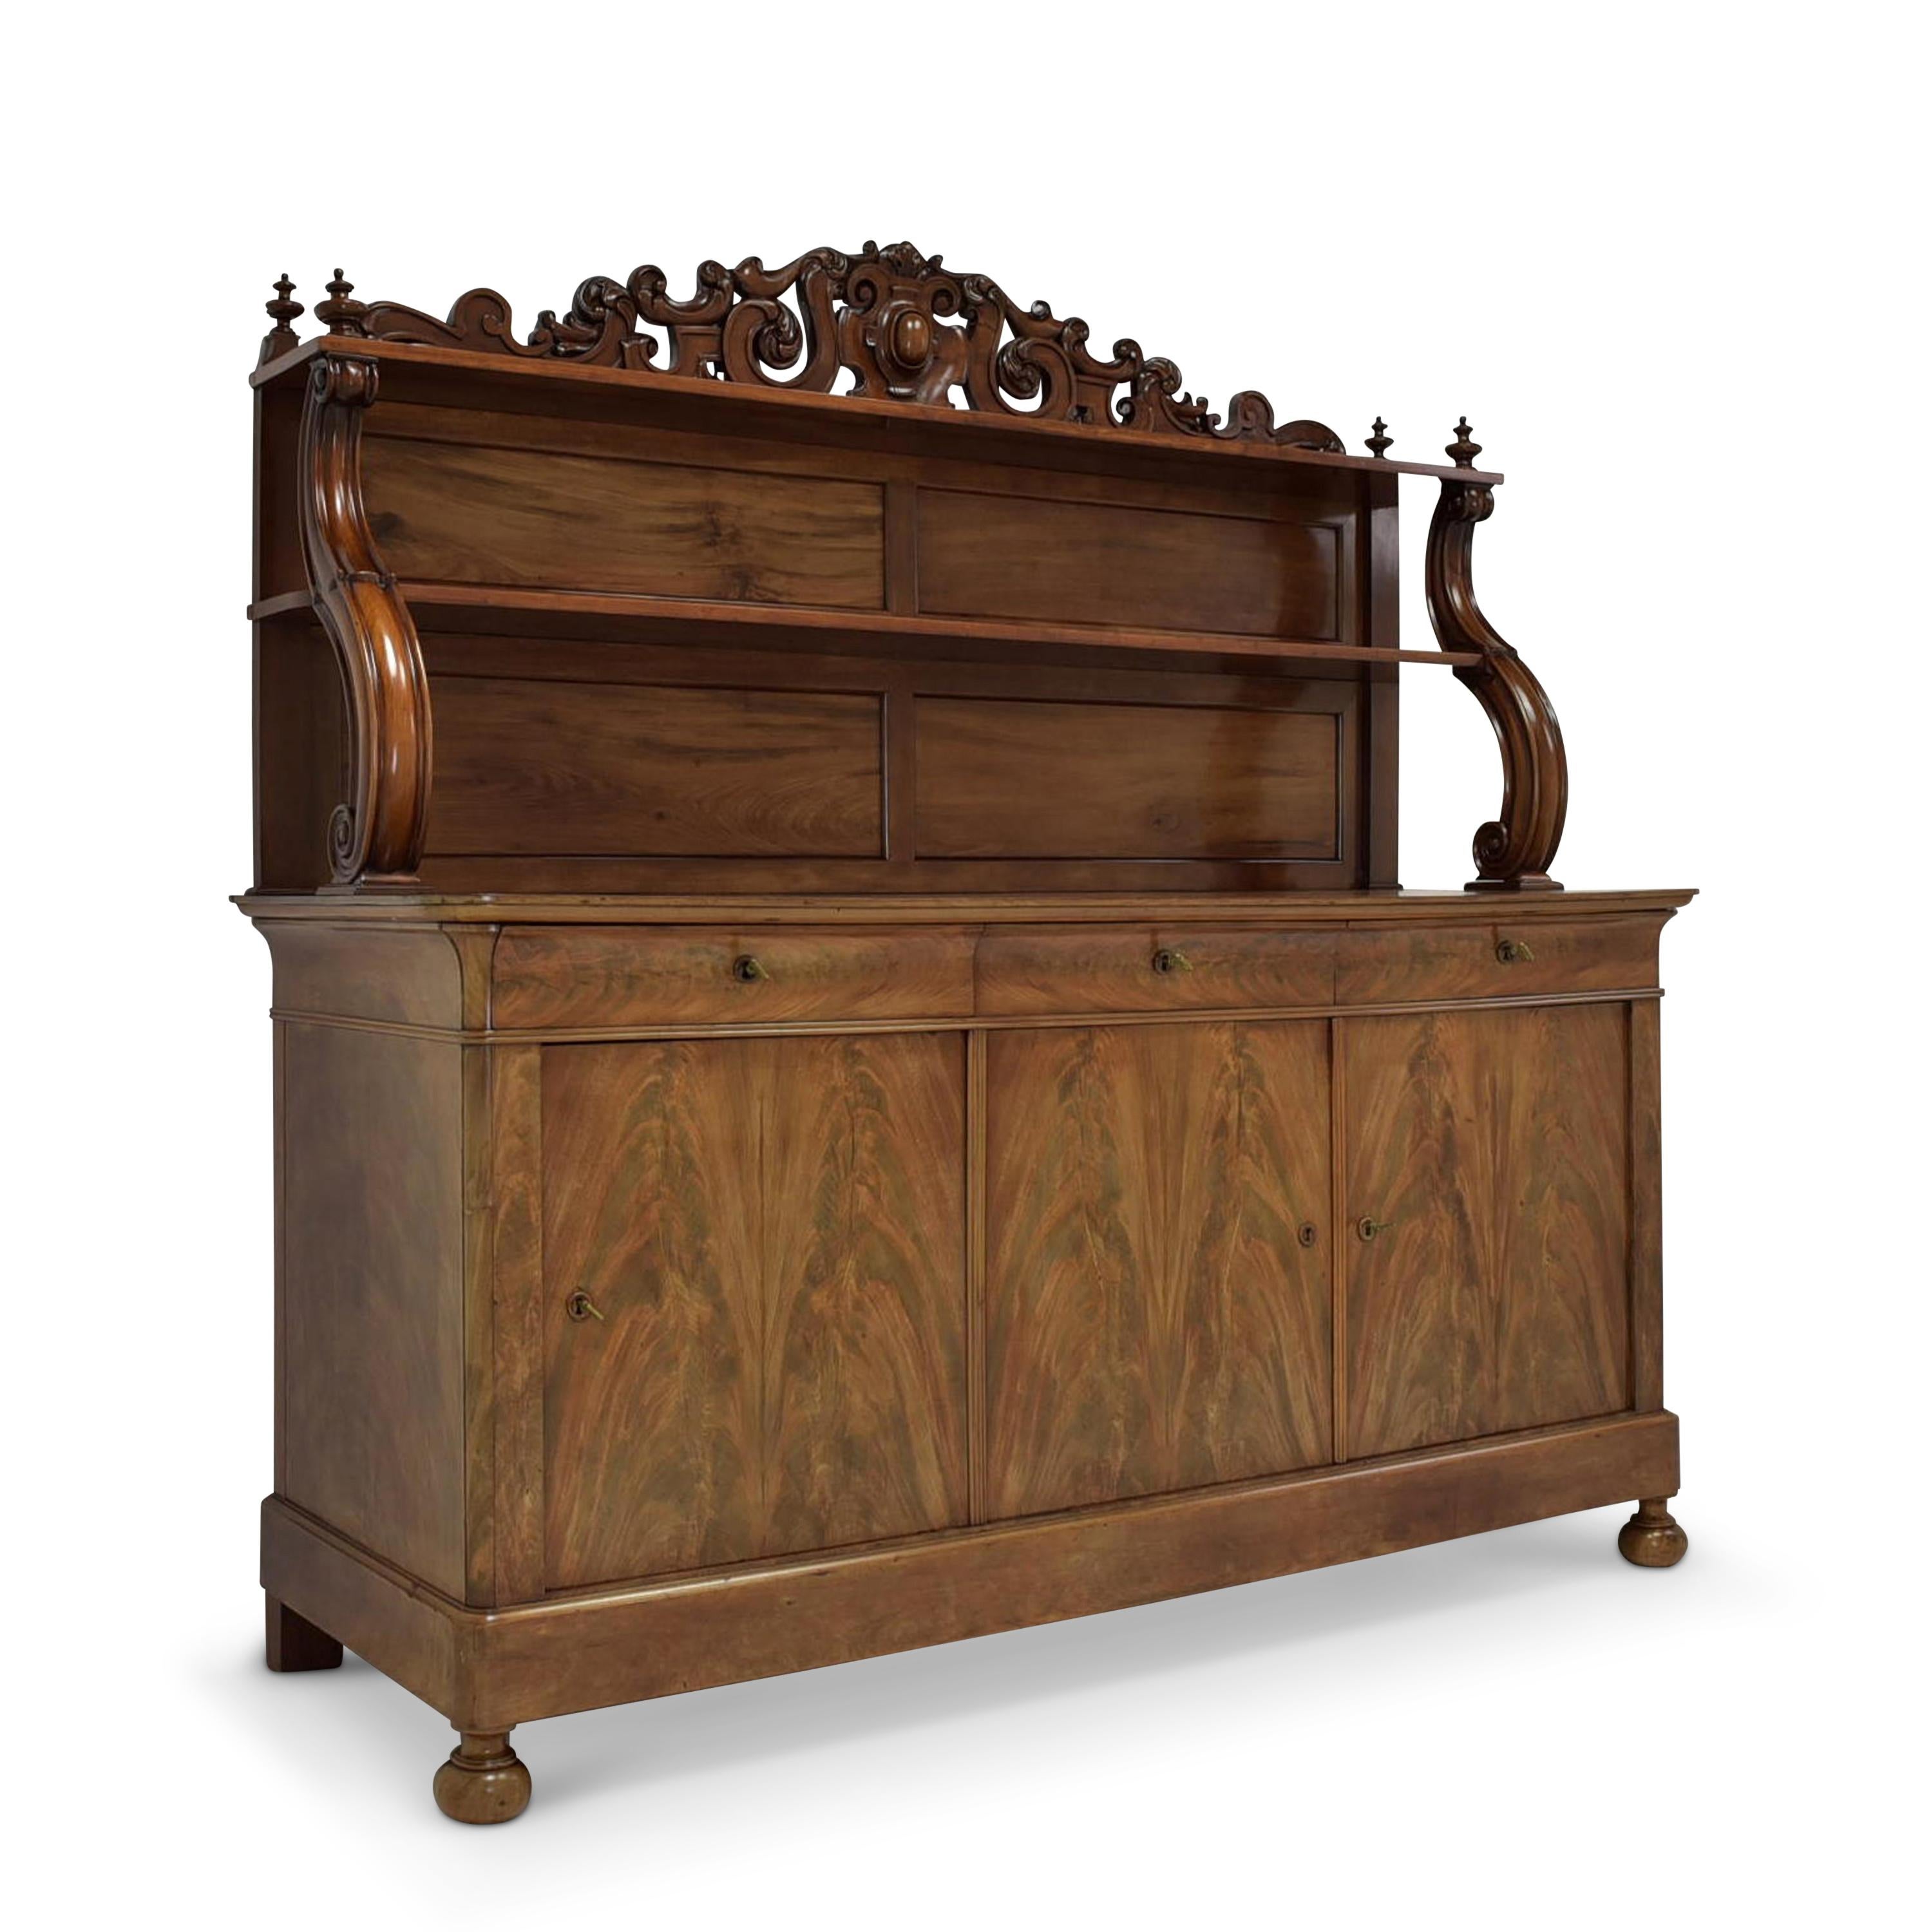 XL dresser restored Louis Philippe mahogany sideboard buffet

Features:
Three-door model with three drawers and two-tier top
High quality
Drawers pronged
Elaborate, voluminous carved decor
Original locks and fittings
Nice veneer